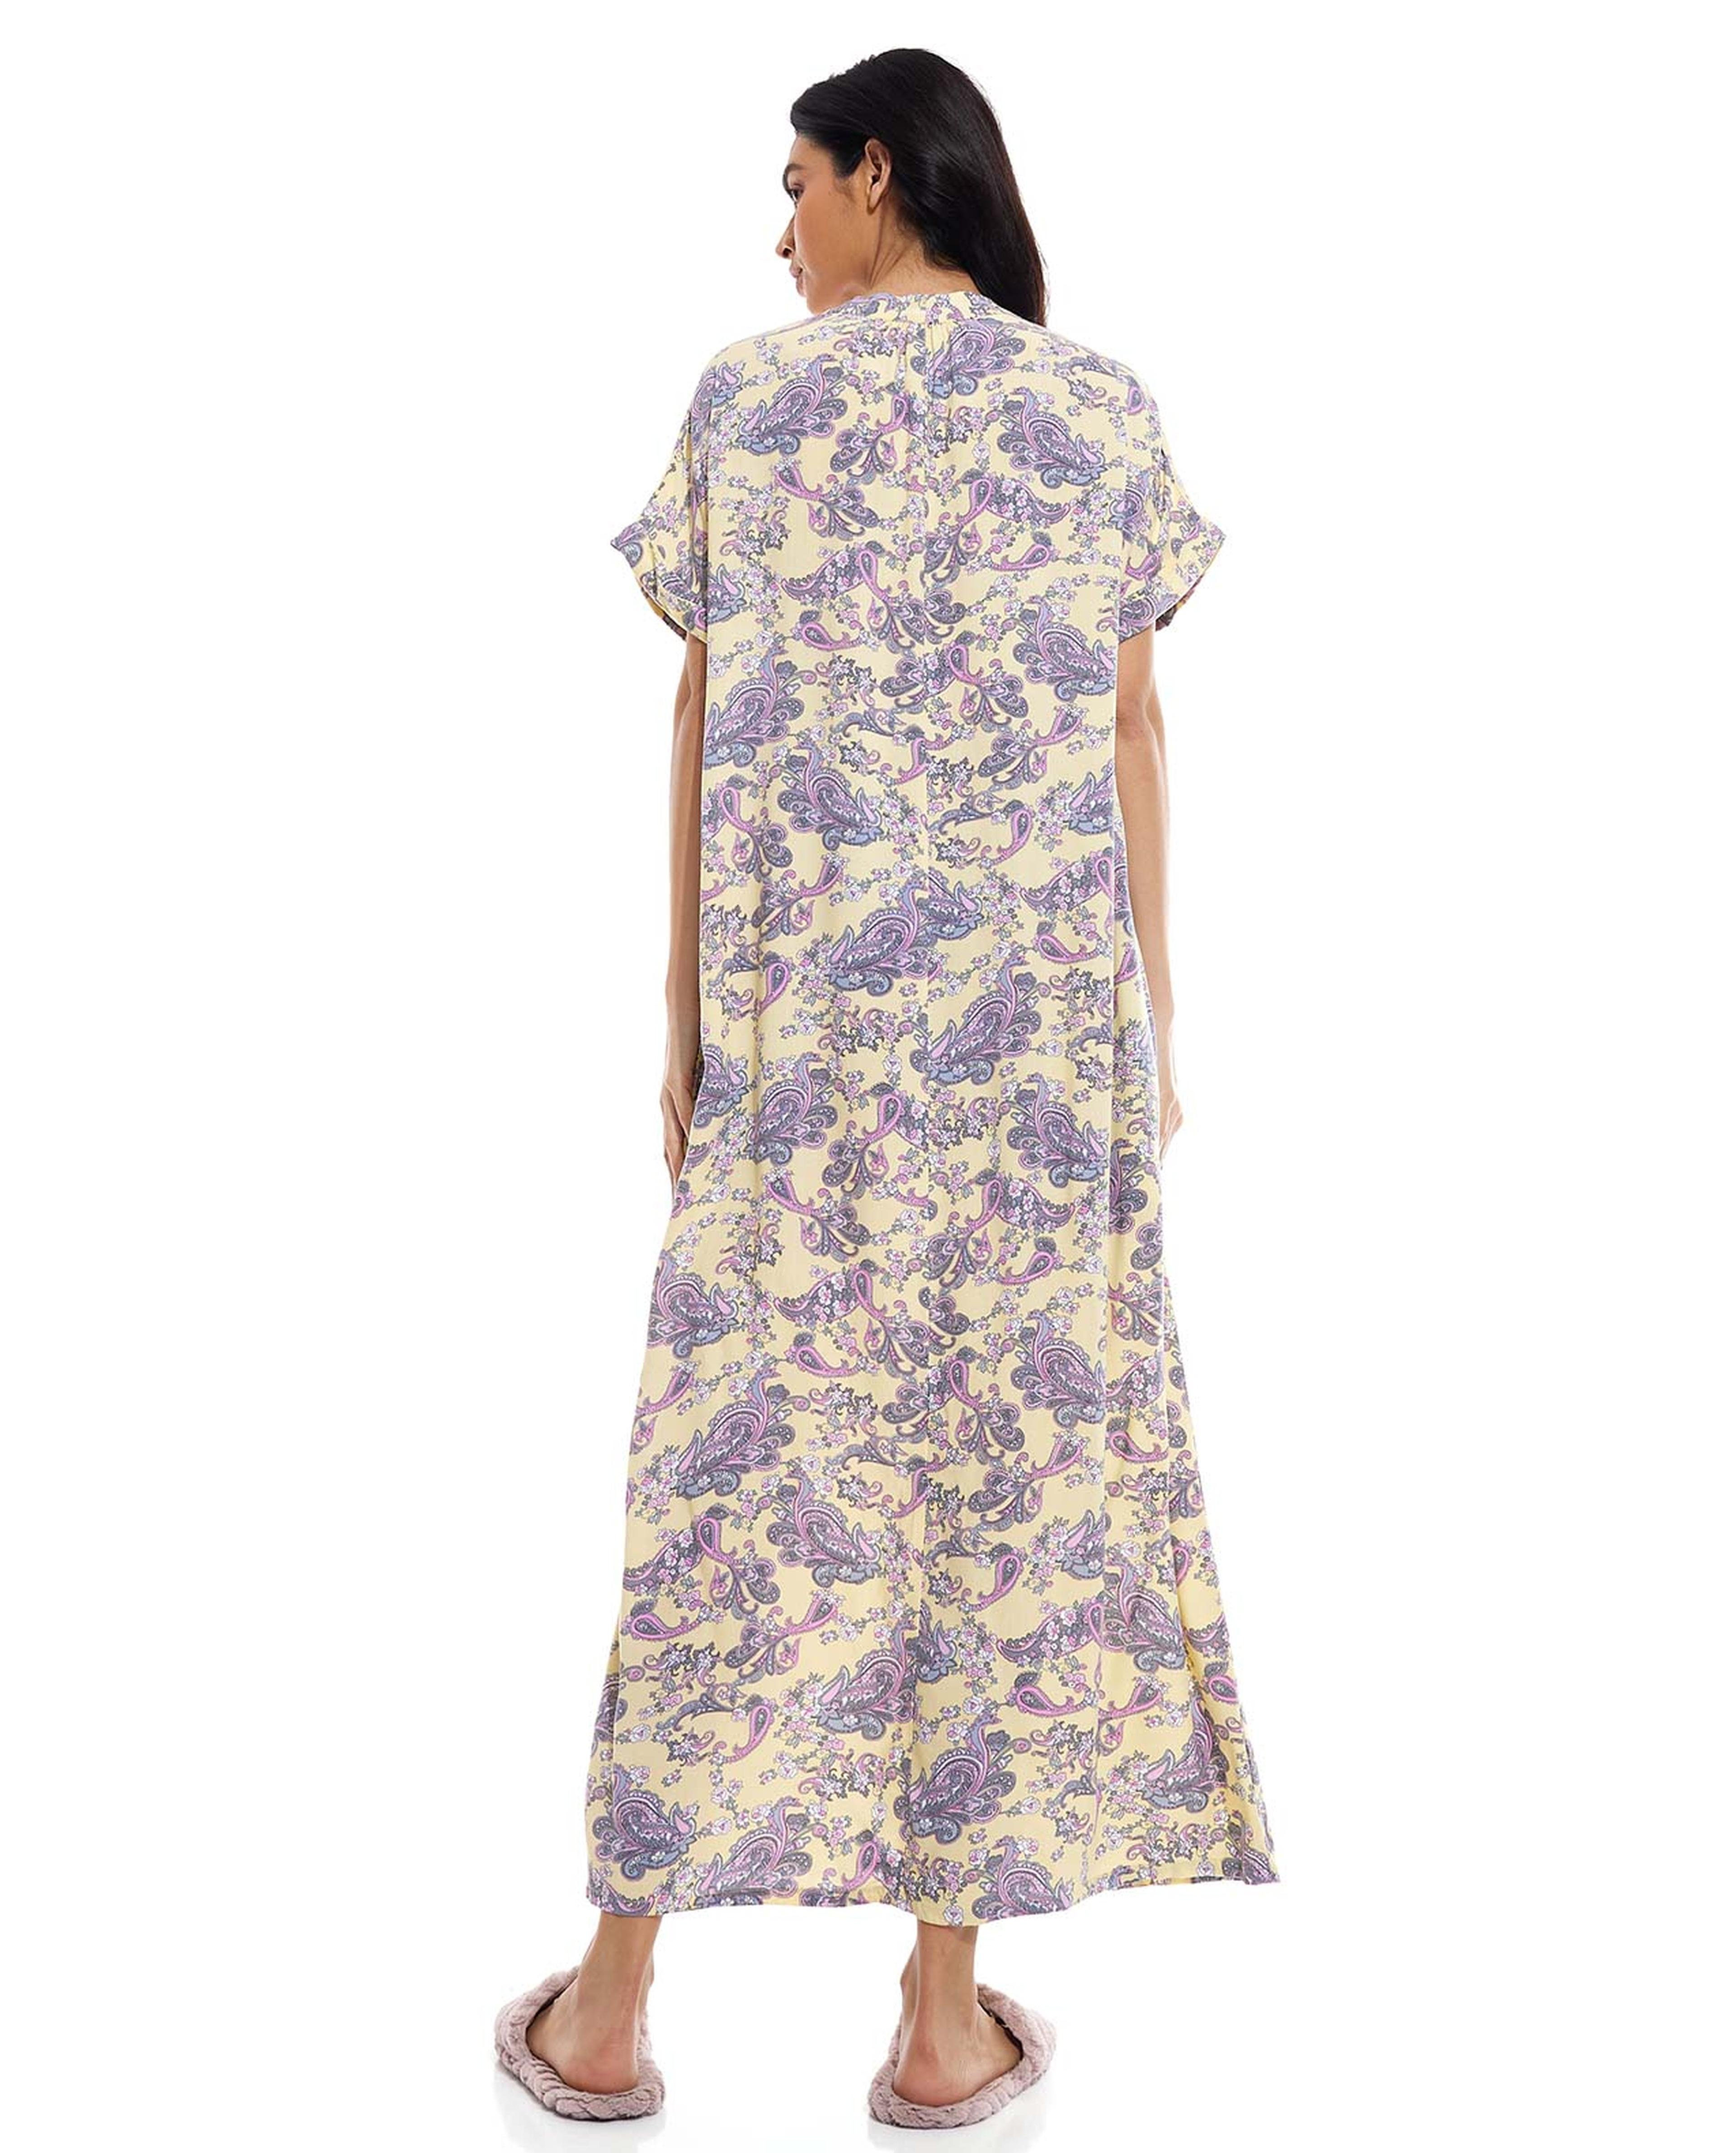 Paisley Print Nightgown with V-Neck and Short Sleeves